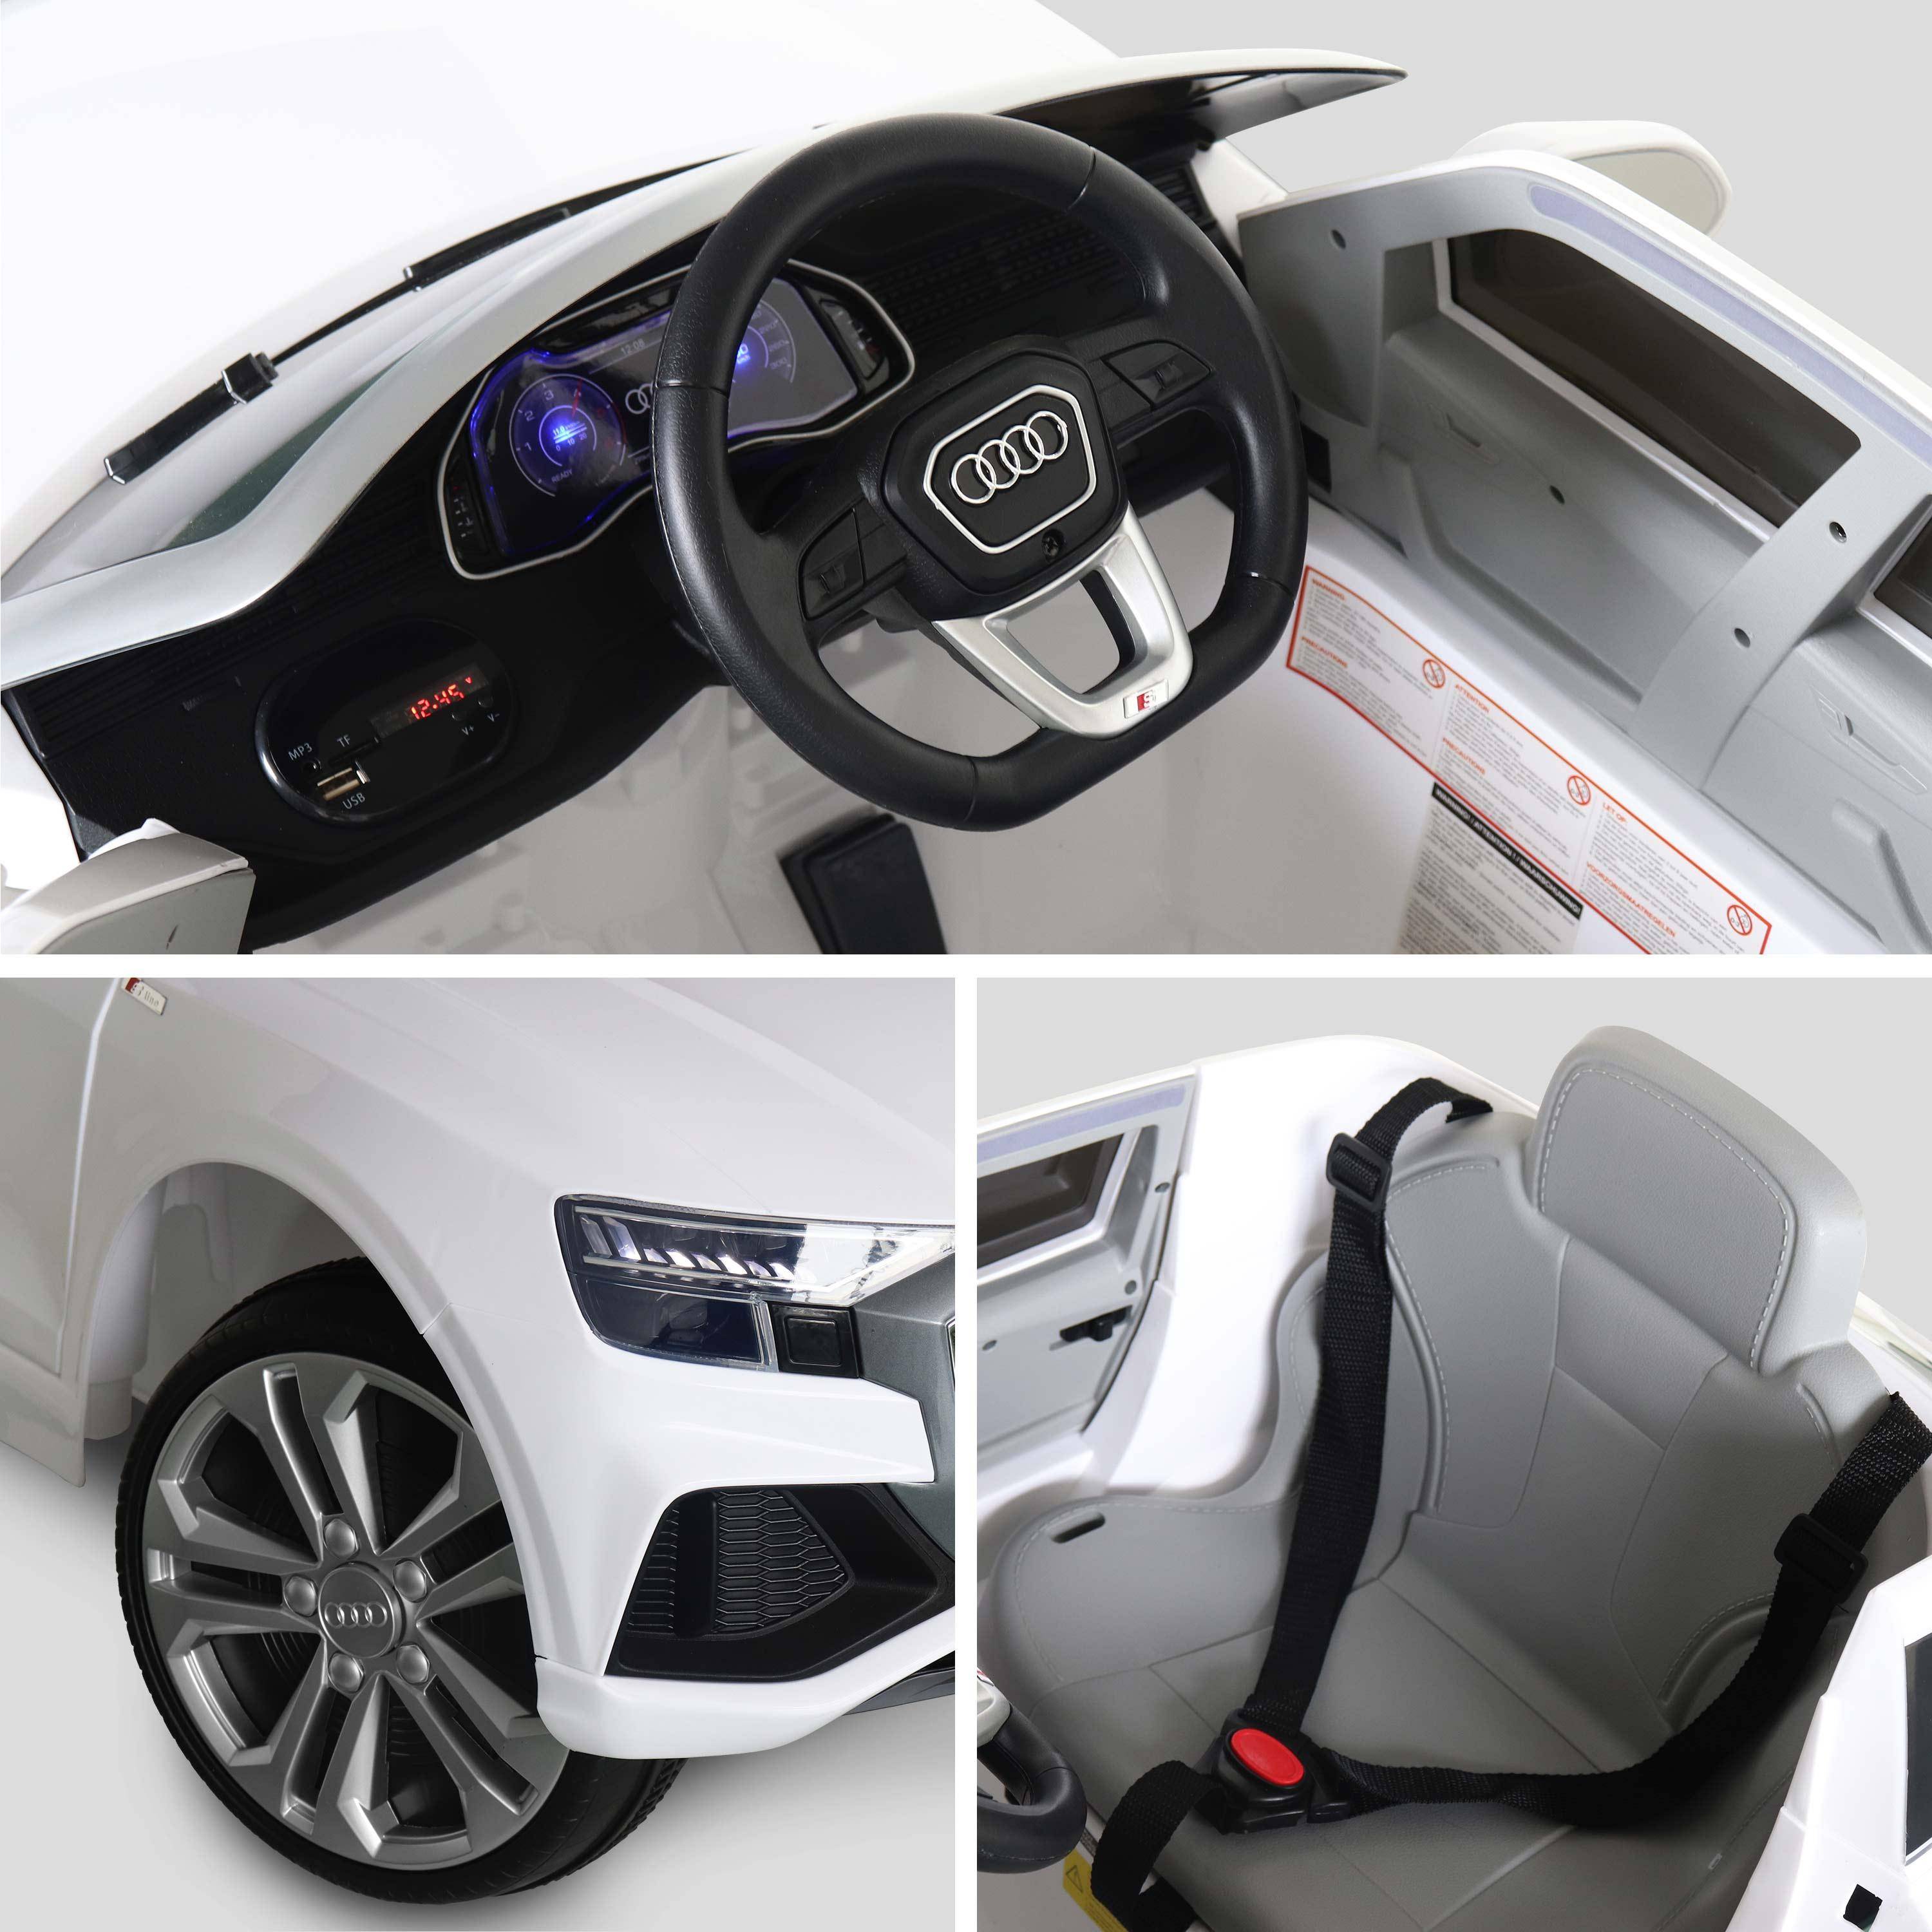 Children's electric car 12V, 1 seat with car radio and remote control - AUDI Q8 - White,sweeek,Photo4